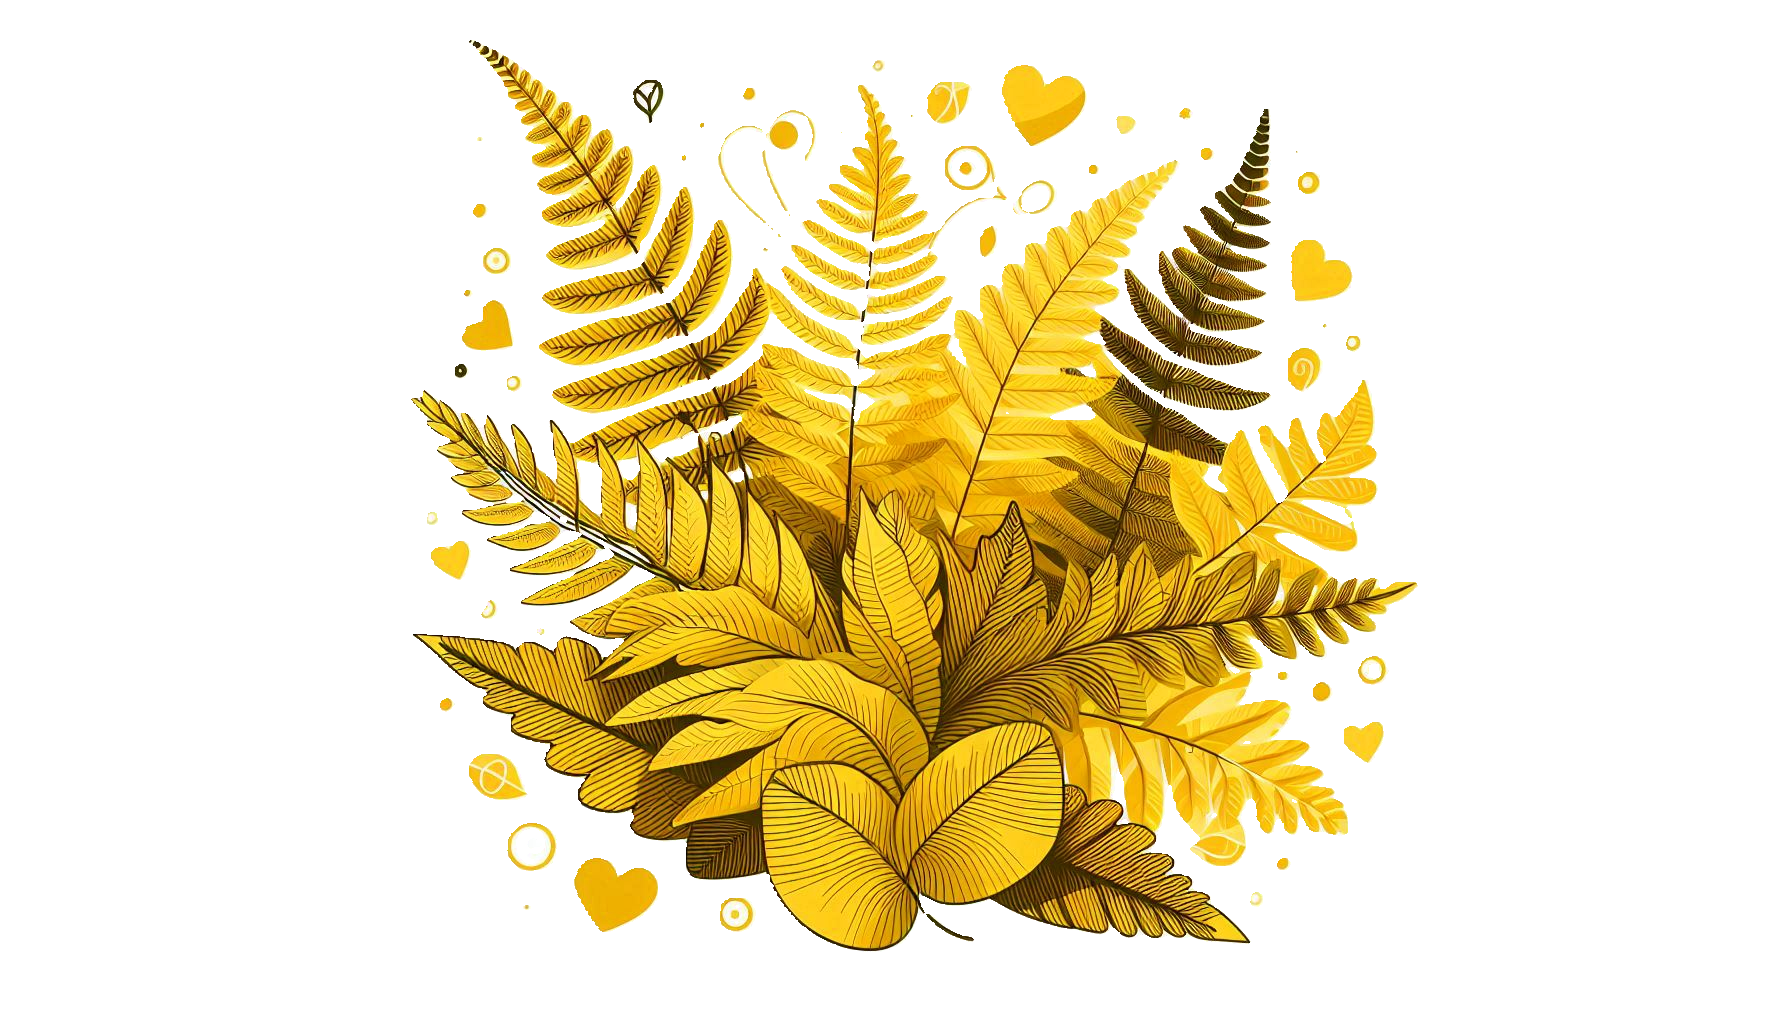 Download Free Transparent PNG of artificial flower leaf design for Websites, Slideshows, and Designs | Royalty-Free and Unlimited Use.